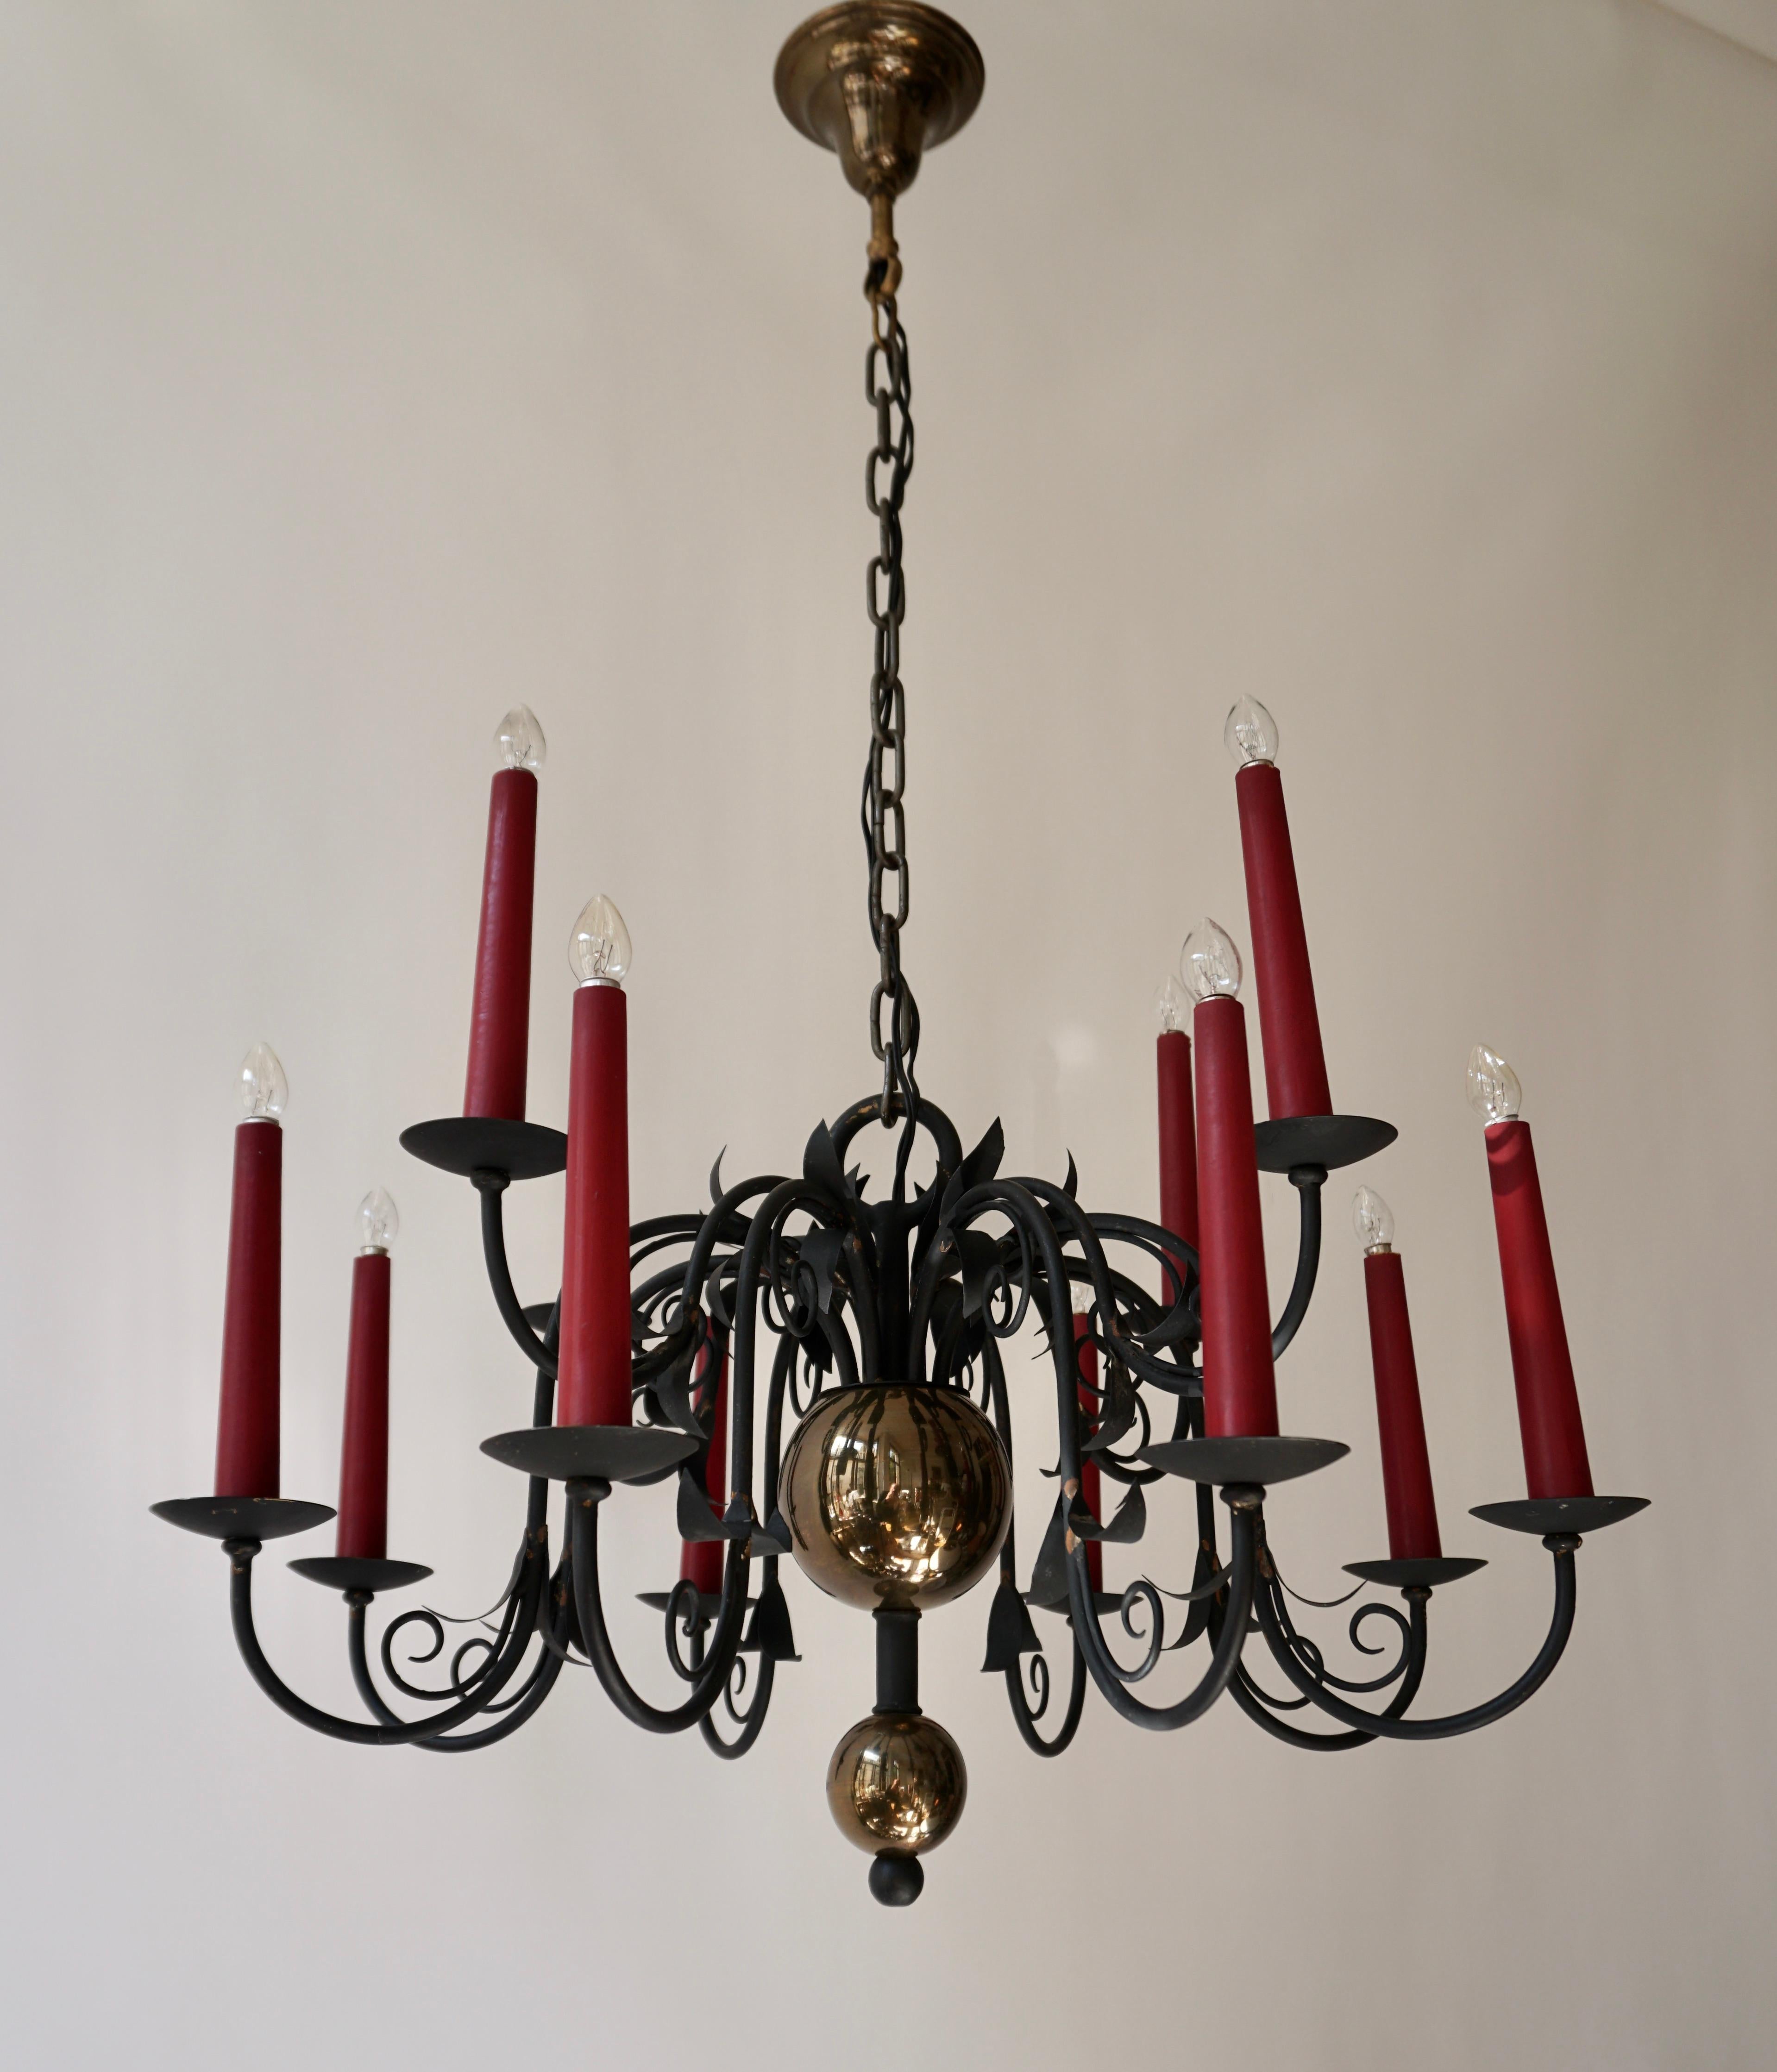 20th Century 1950s Black Wrought Iron Gothic Chandelier with 12 Red Candlesticks